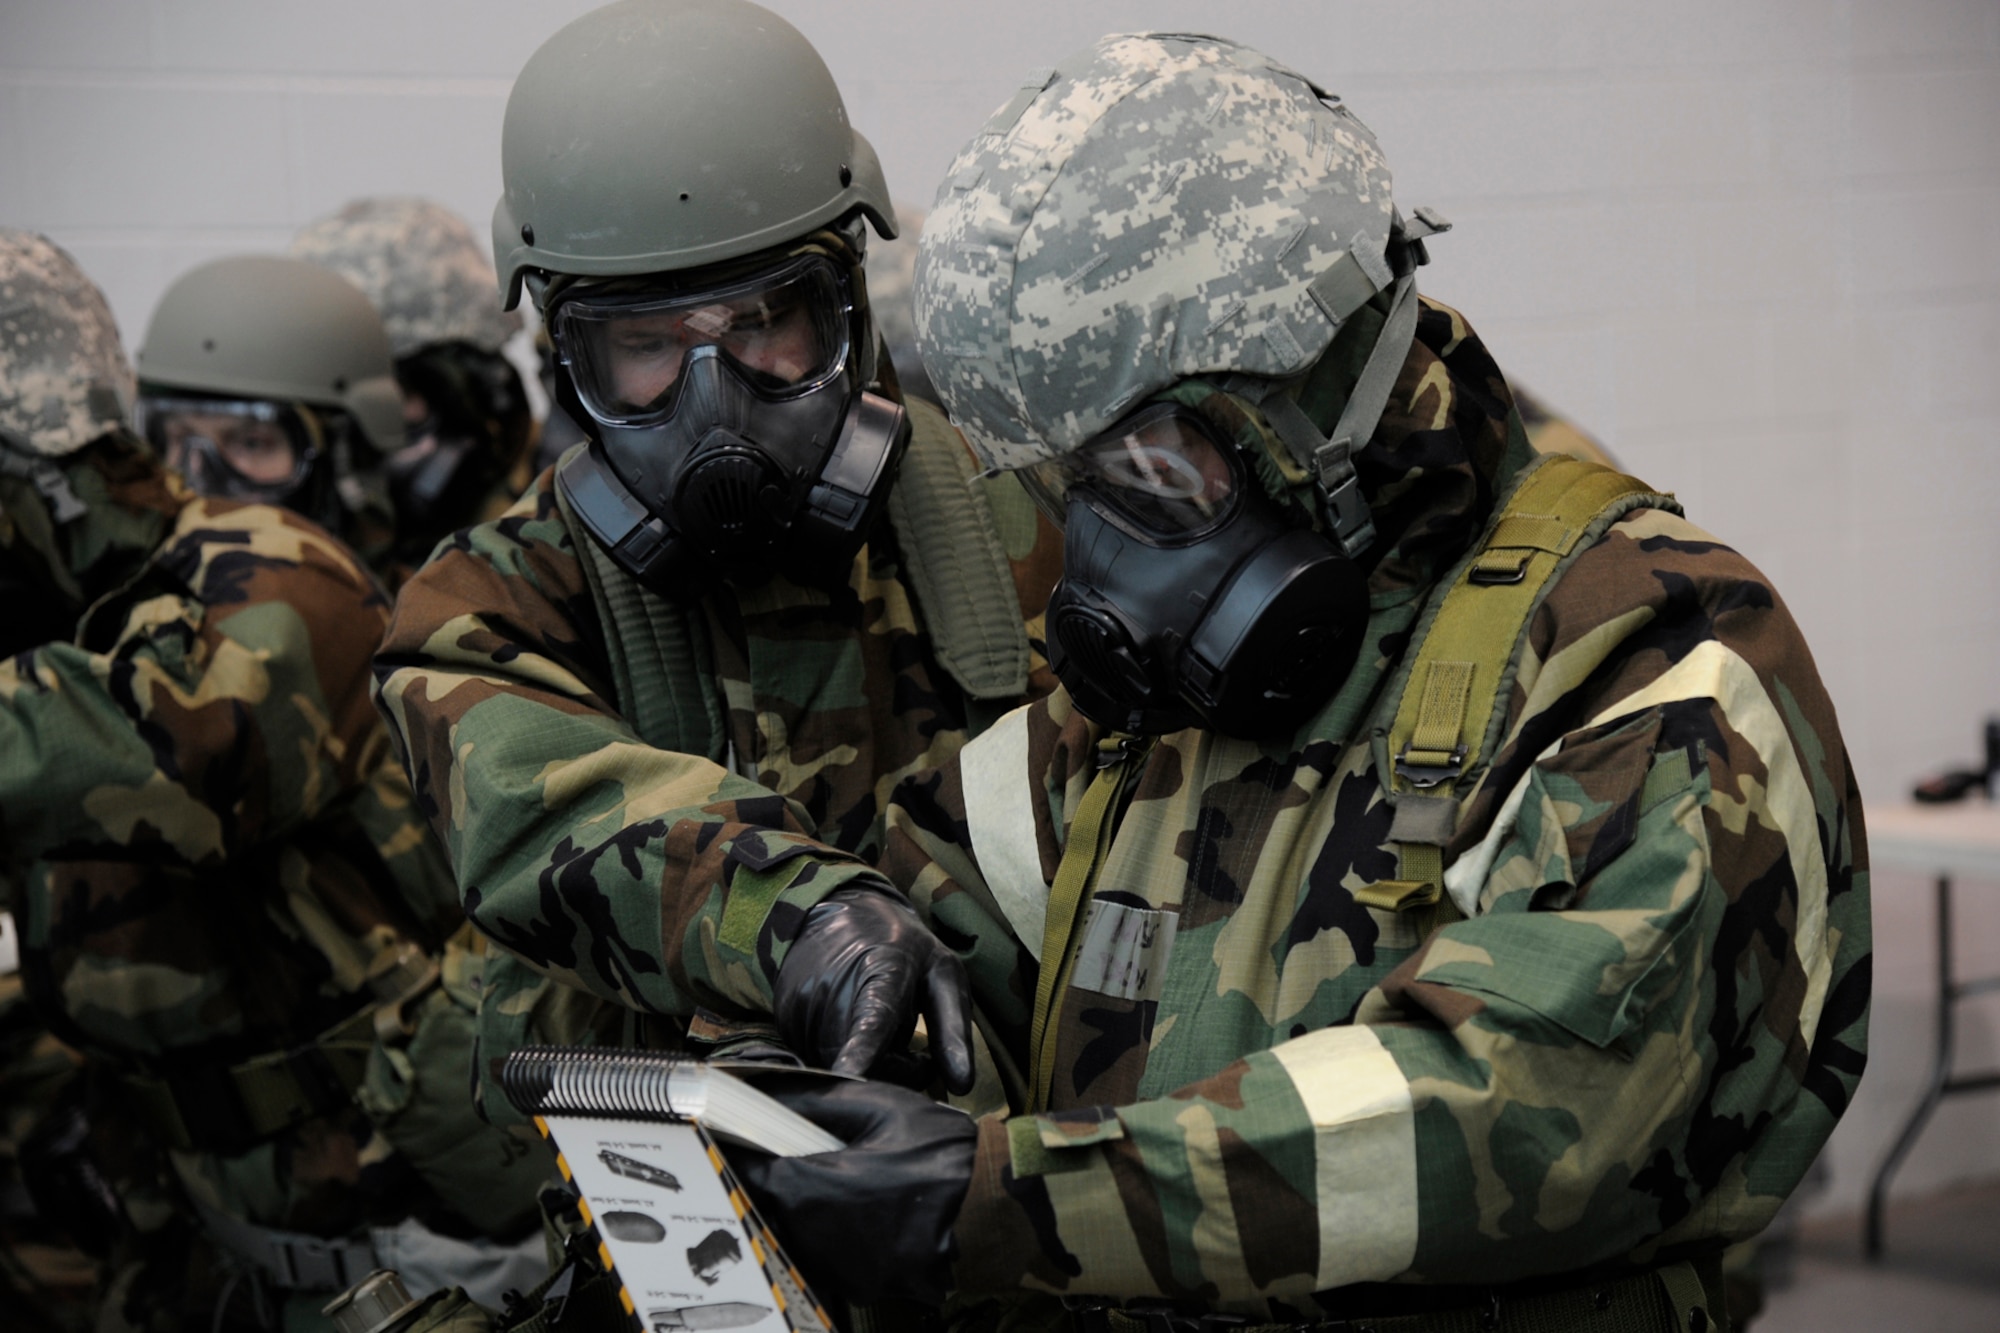 Two 127th Wing Airmen review information inside the Airman's Manual while dressed in Mission Oriented Protective Posture, or MOPP gear, during an expeditionary skills training day at Selfridge Air National Guard Base, Mich., Feb 8, 2015. Every three years, all airmen must attend expeditionary skills refresher training, in order to maintain their readiness.  (U.S. Air National Guard photo by Senior Amn. Ryan Zeski)